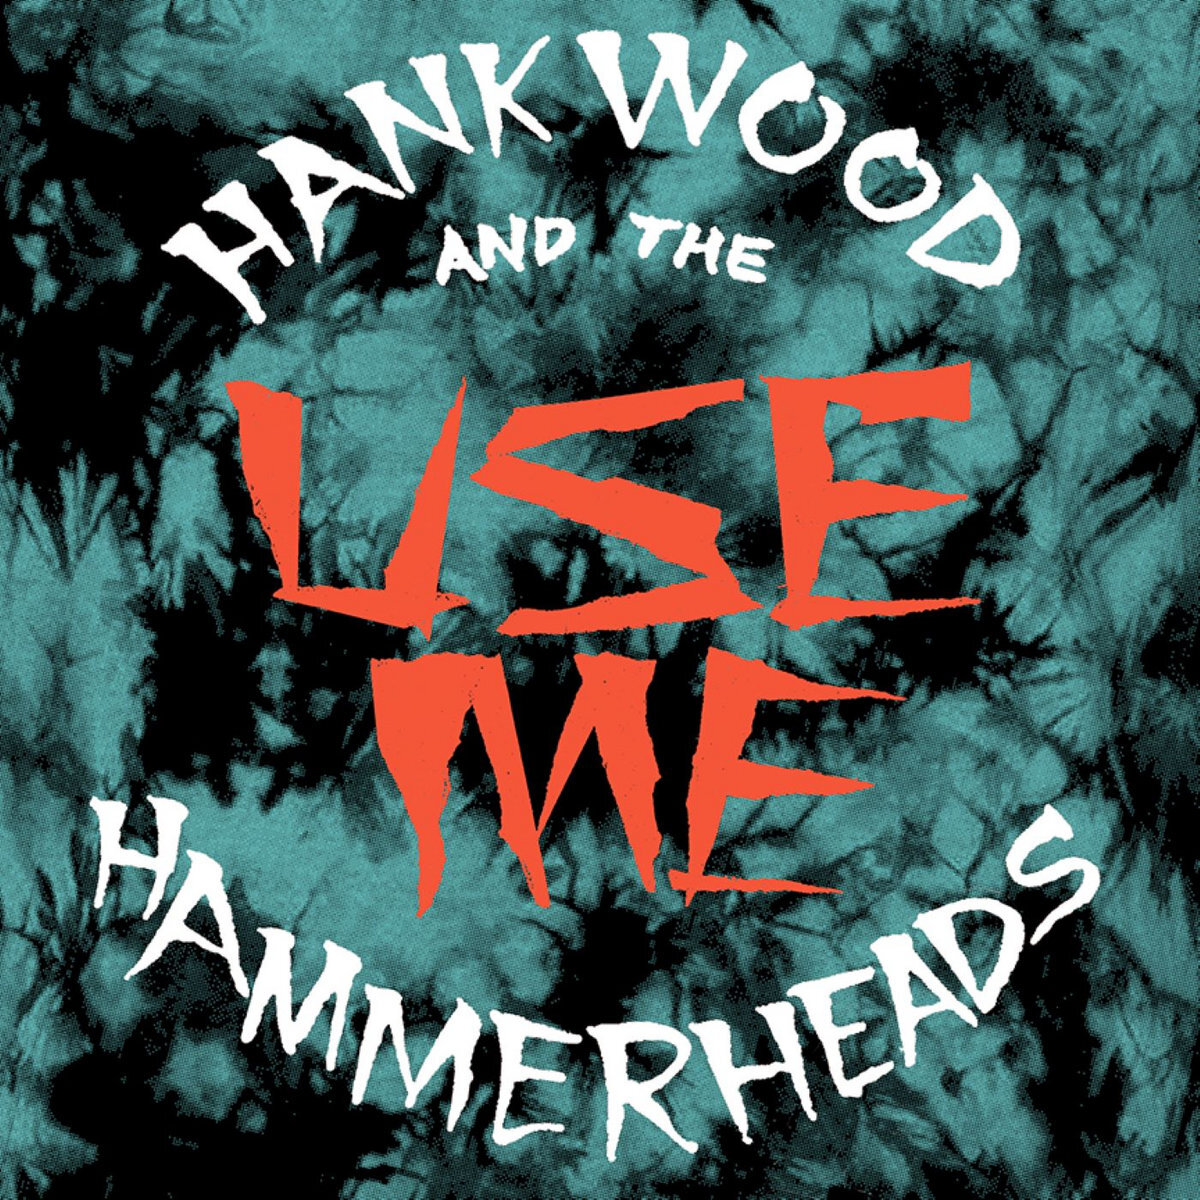 Hank Wood and the Hammerheads - Use Me